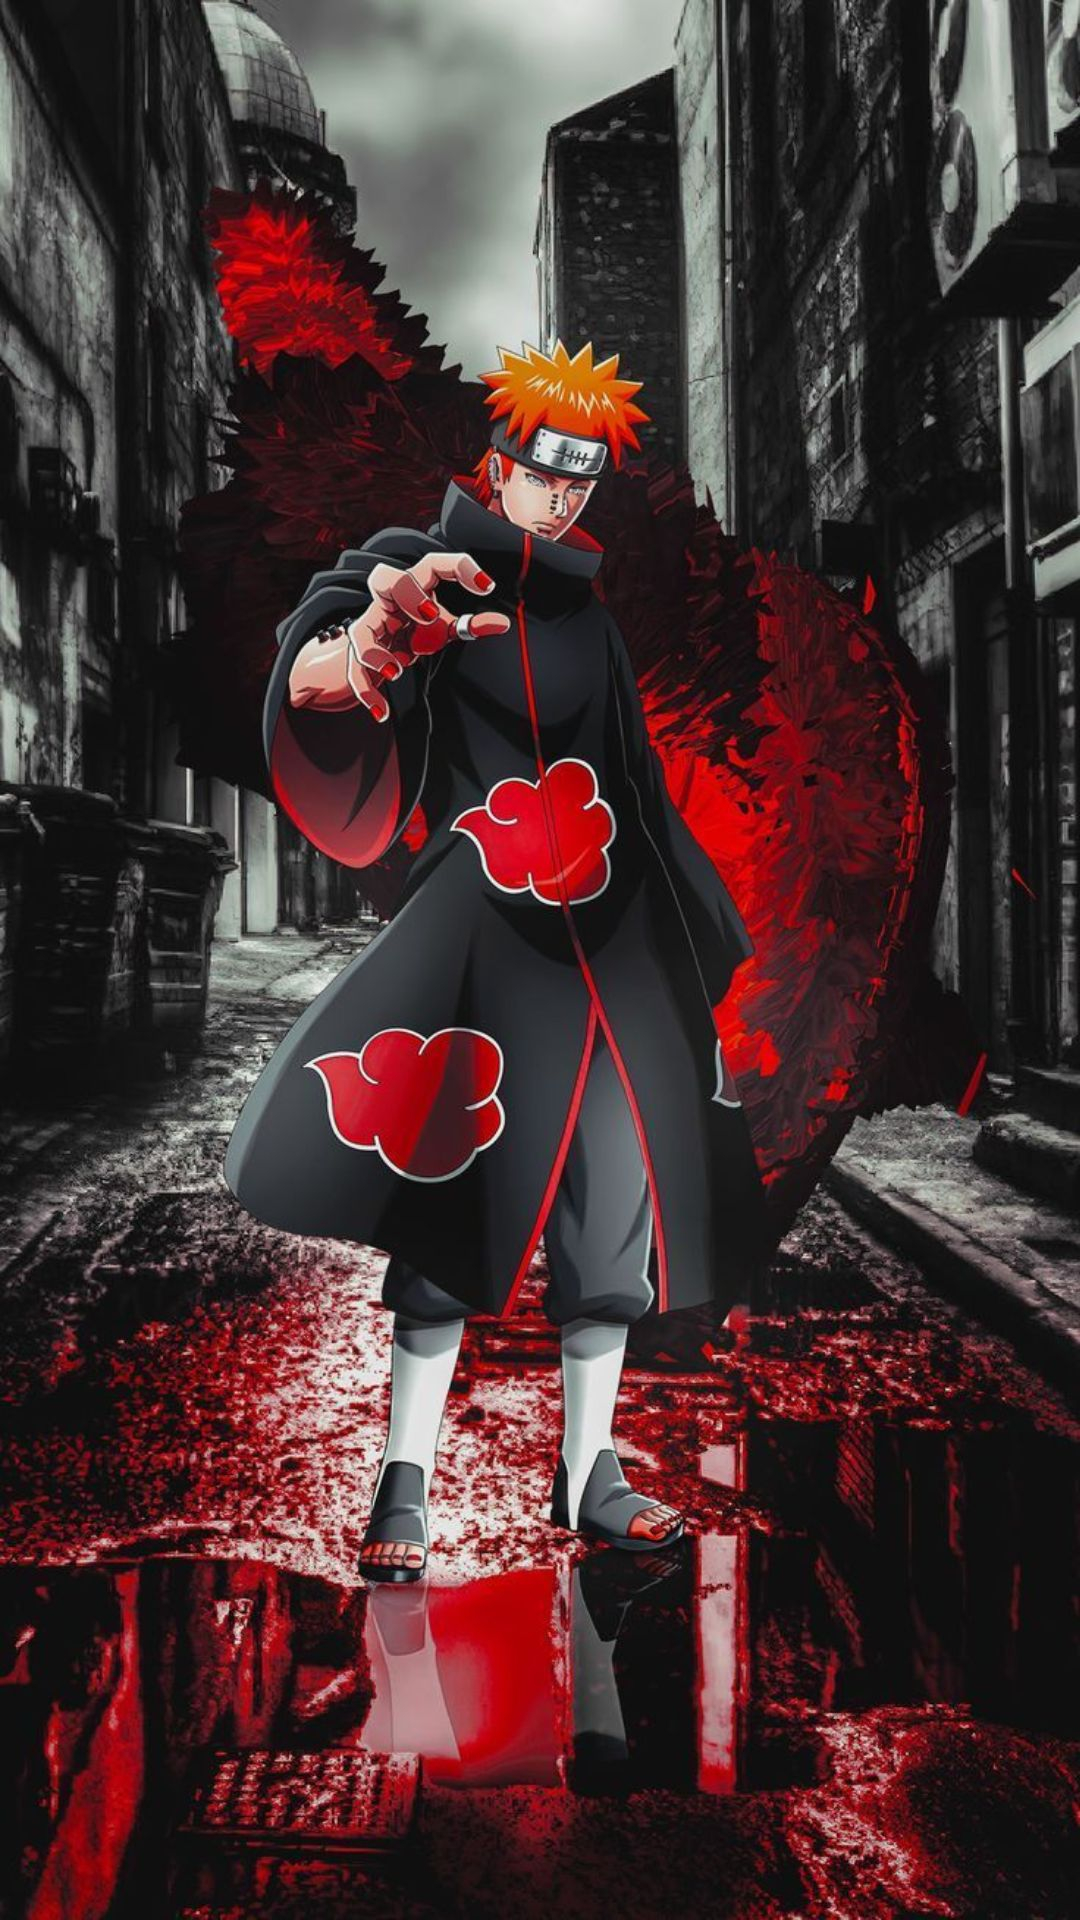 1080x1920 Naruto Pain Wallpaper- Top Best Quality Naruto Pain Backgrounds (HD,4k